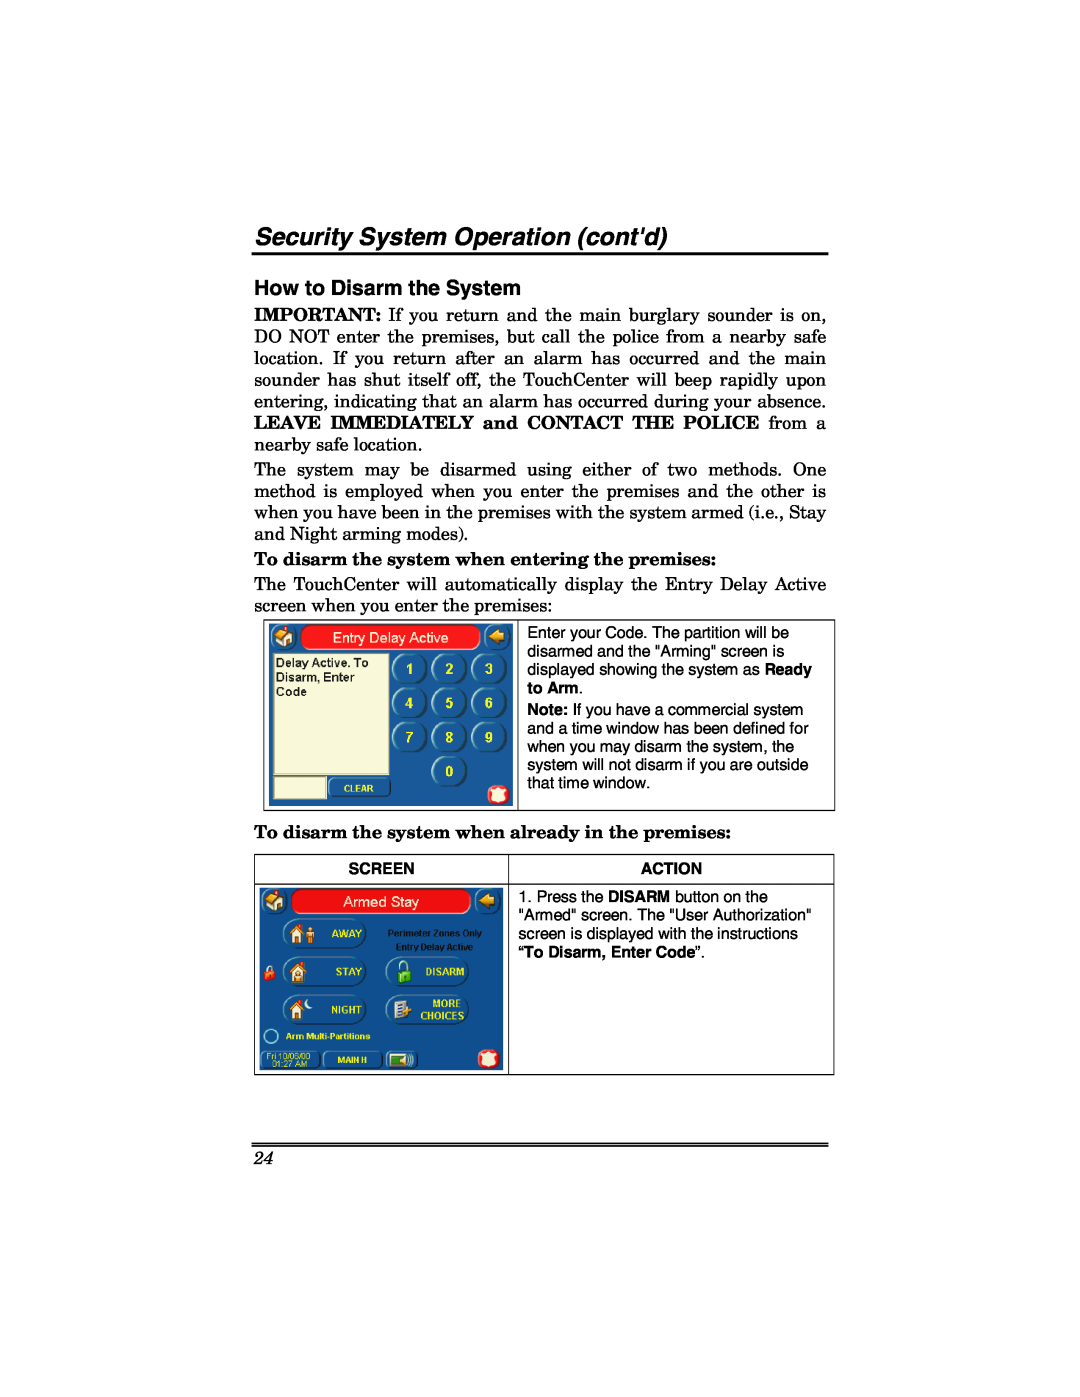 Honeywell 6271 How to Disarm the System, To disarm the system when entering the premises, Security System Operation contd 